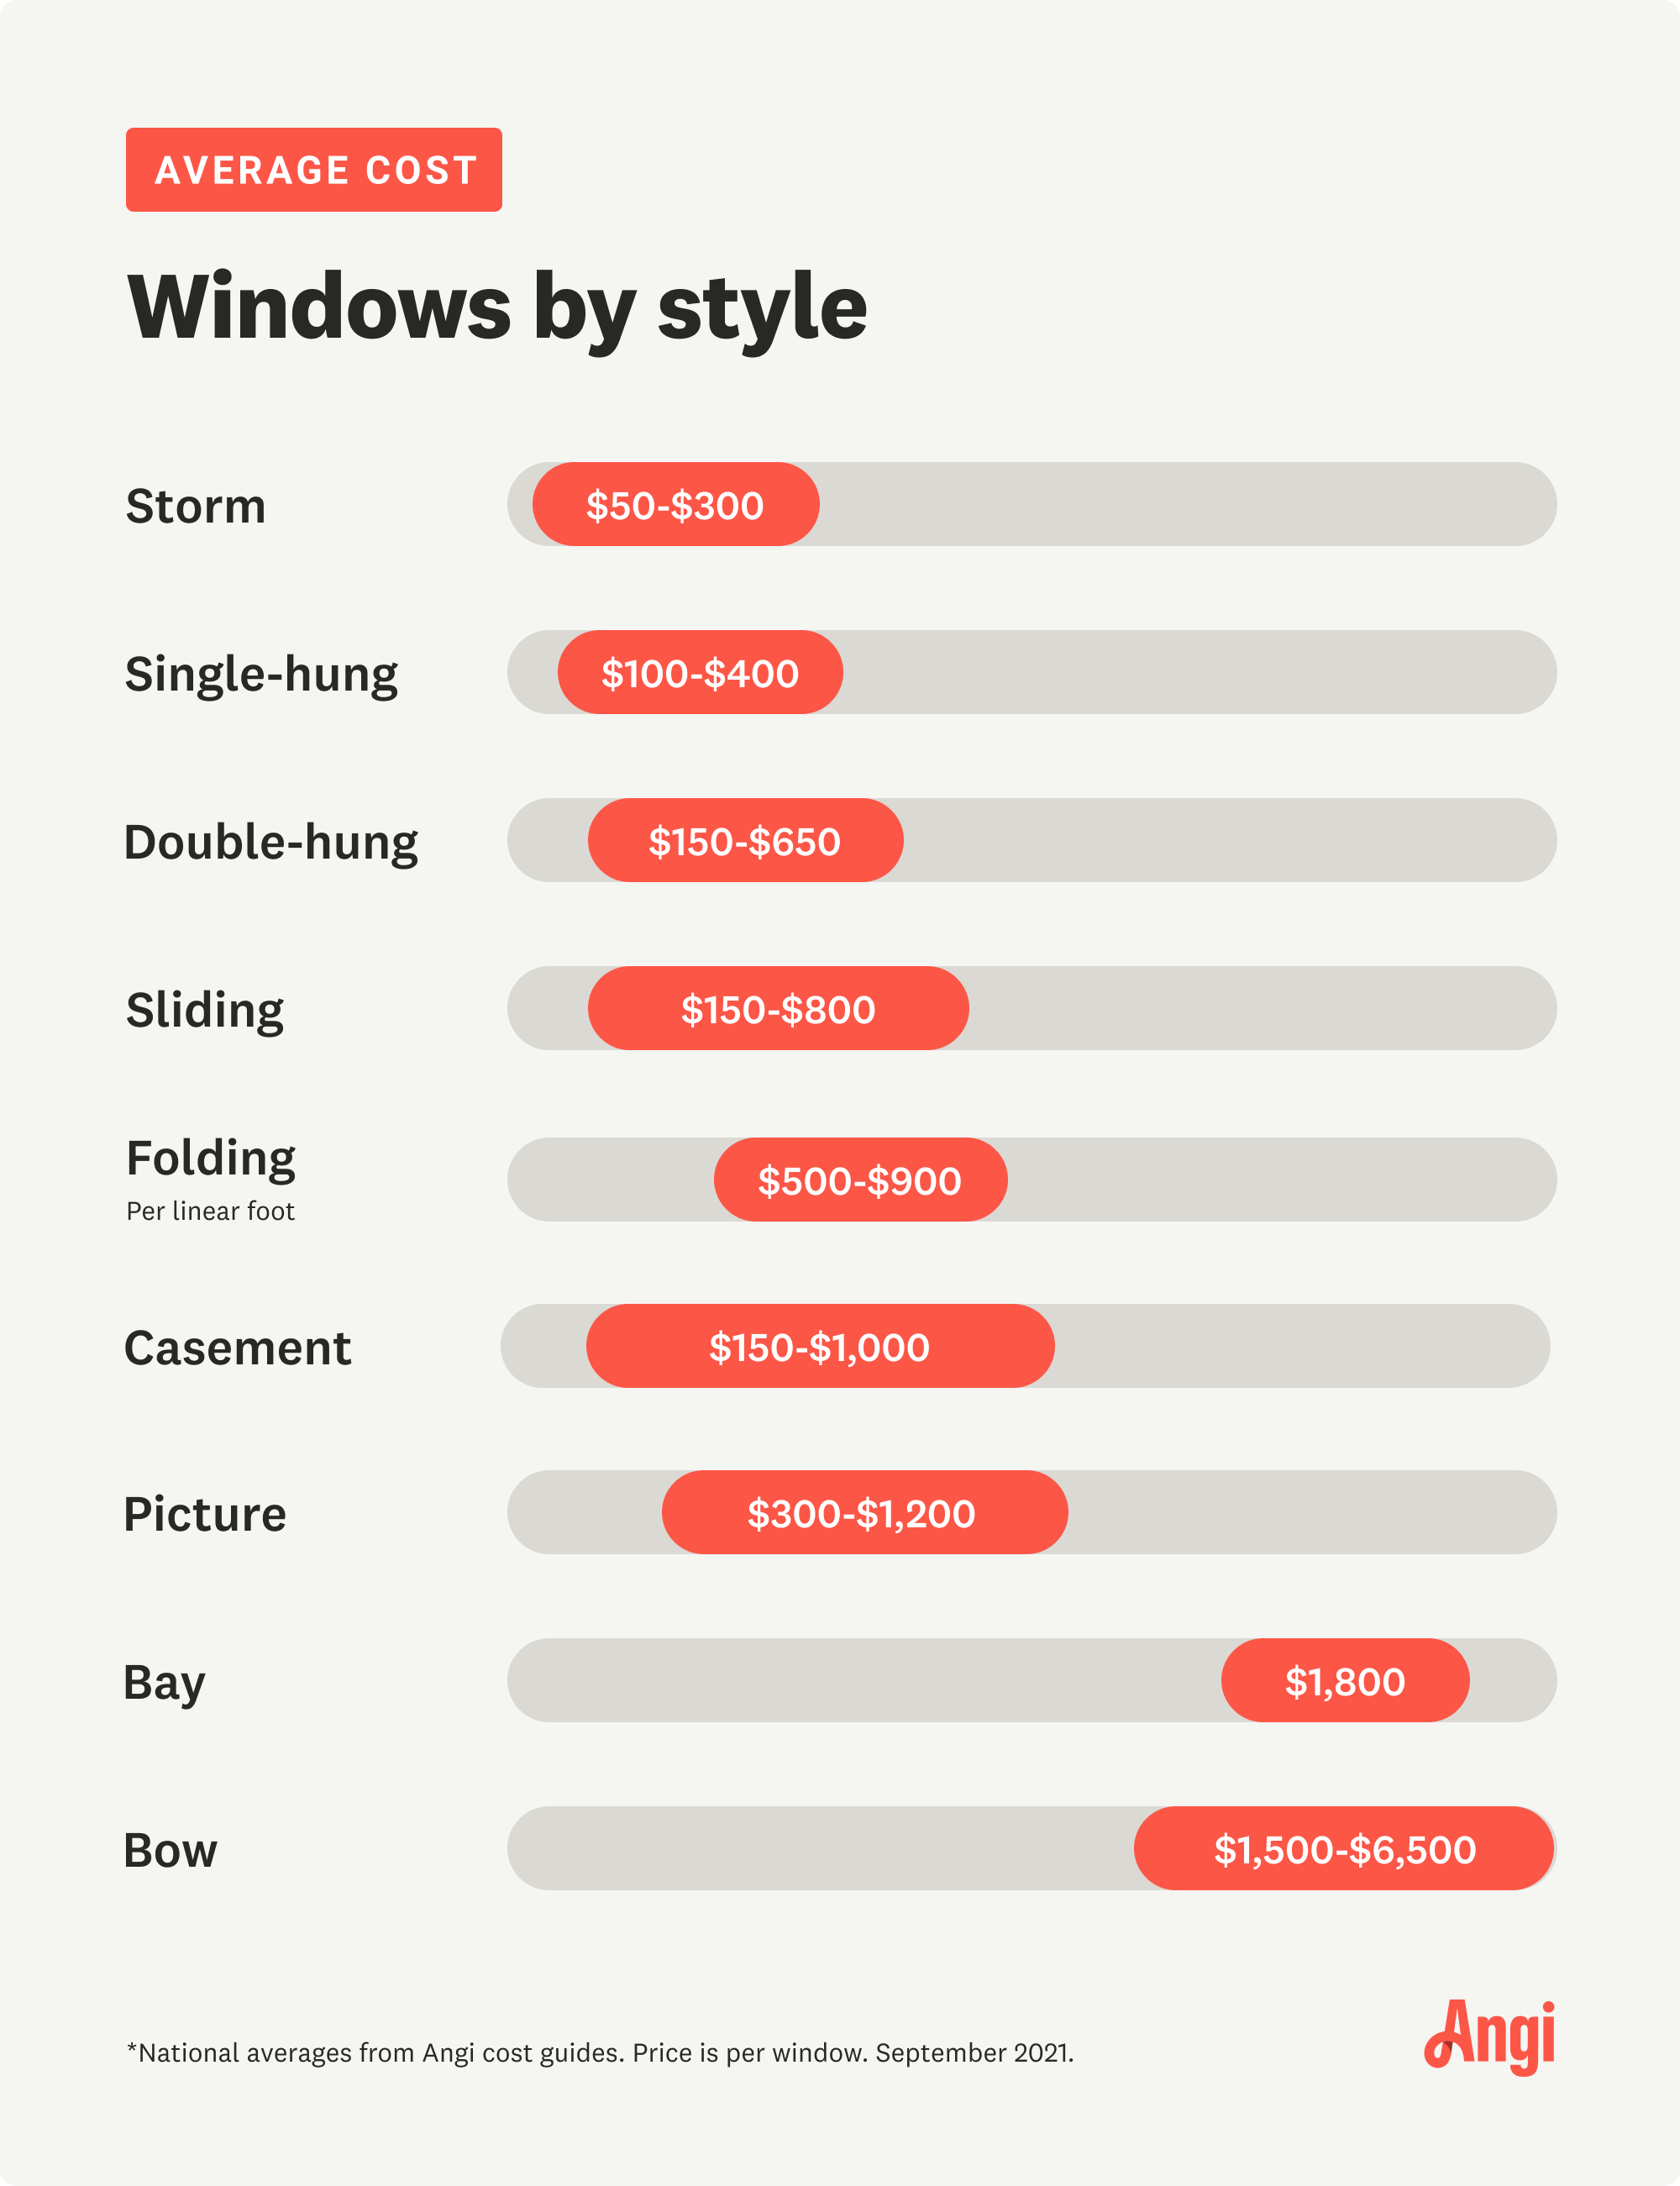 9 window styles compared, with average costs ranging from $50 to $6,500